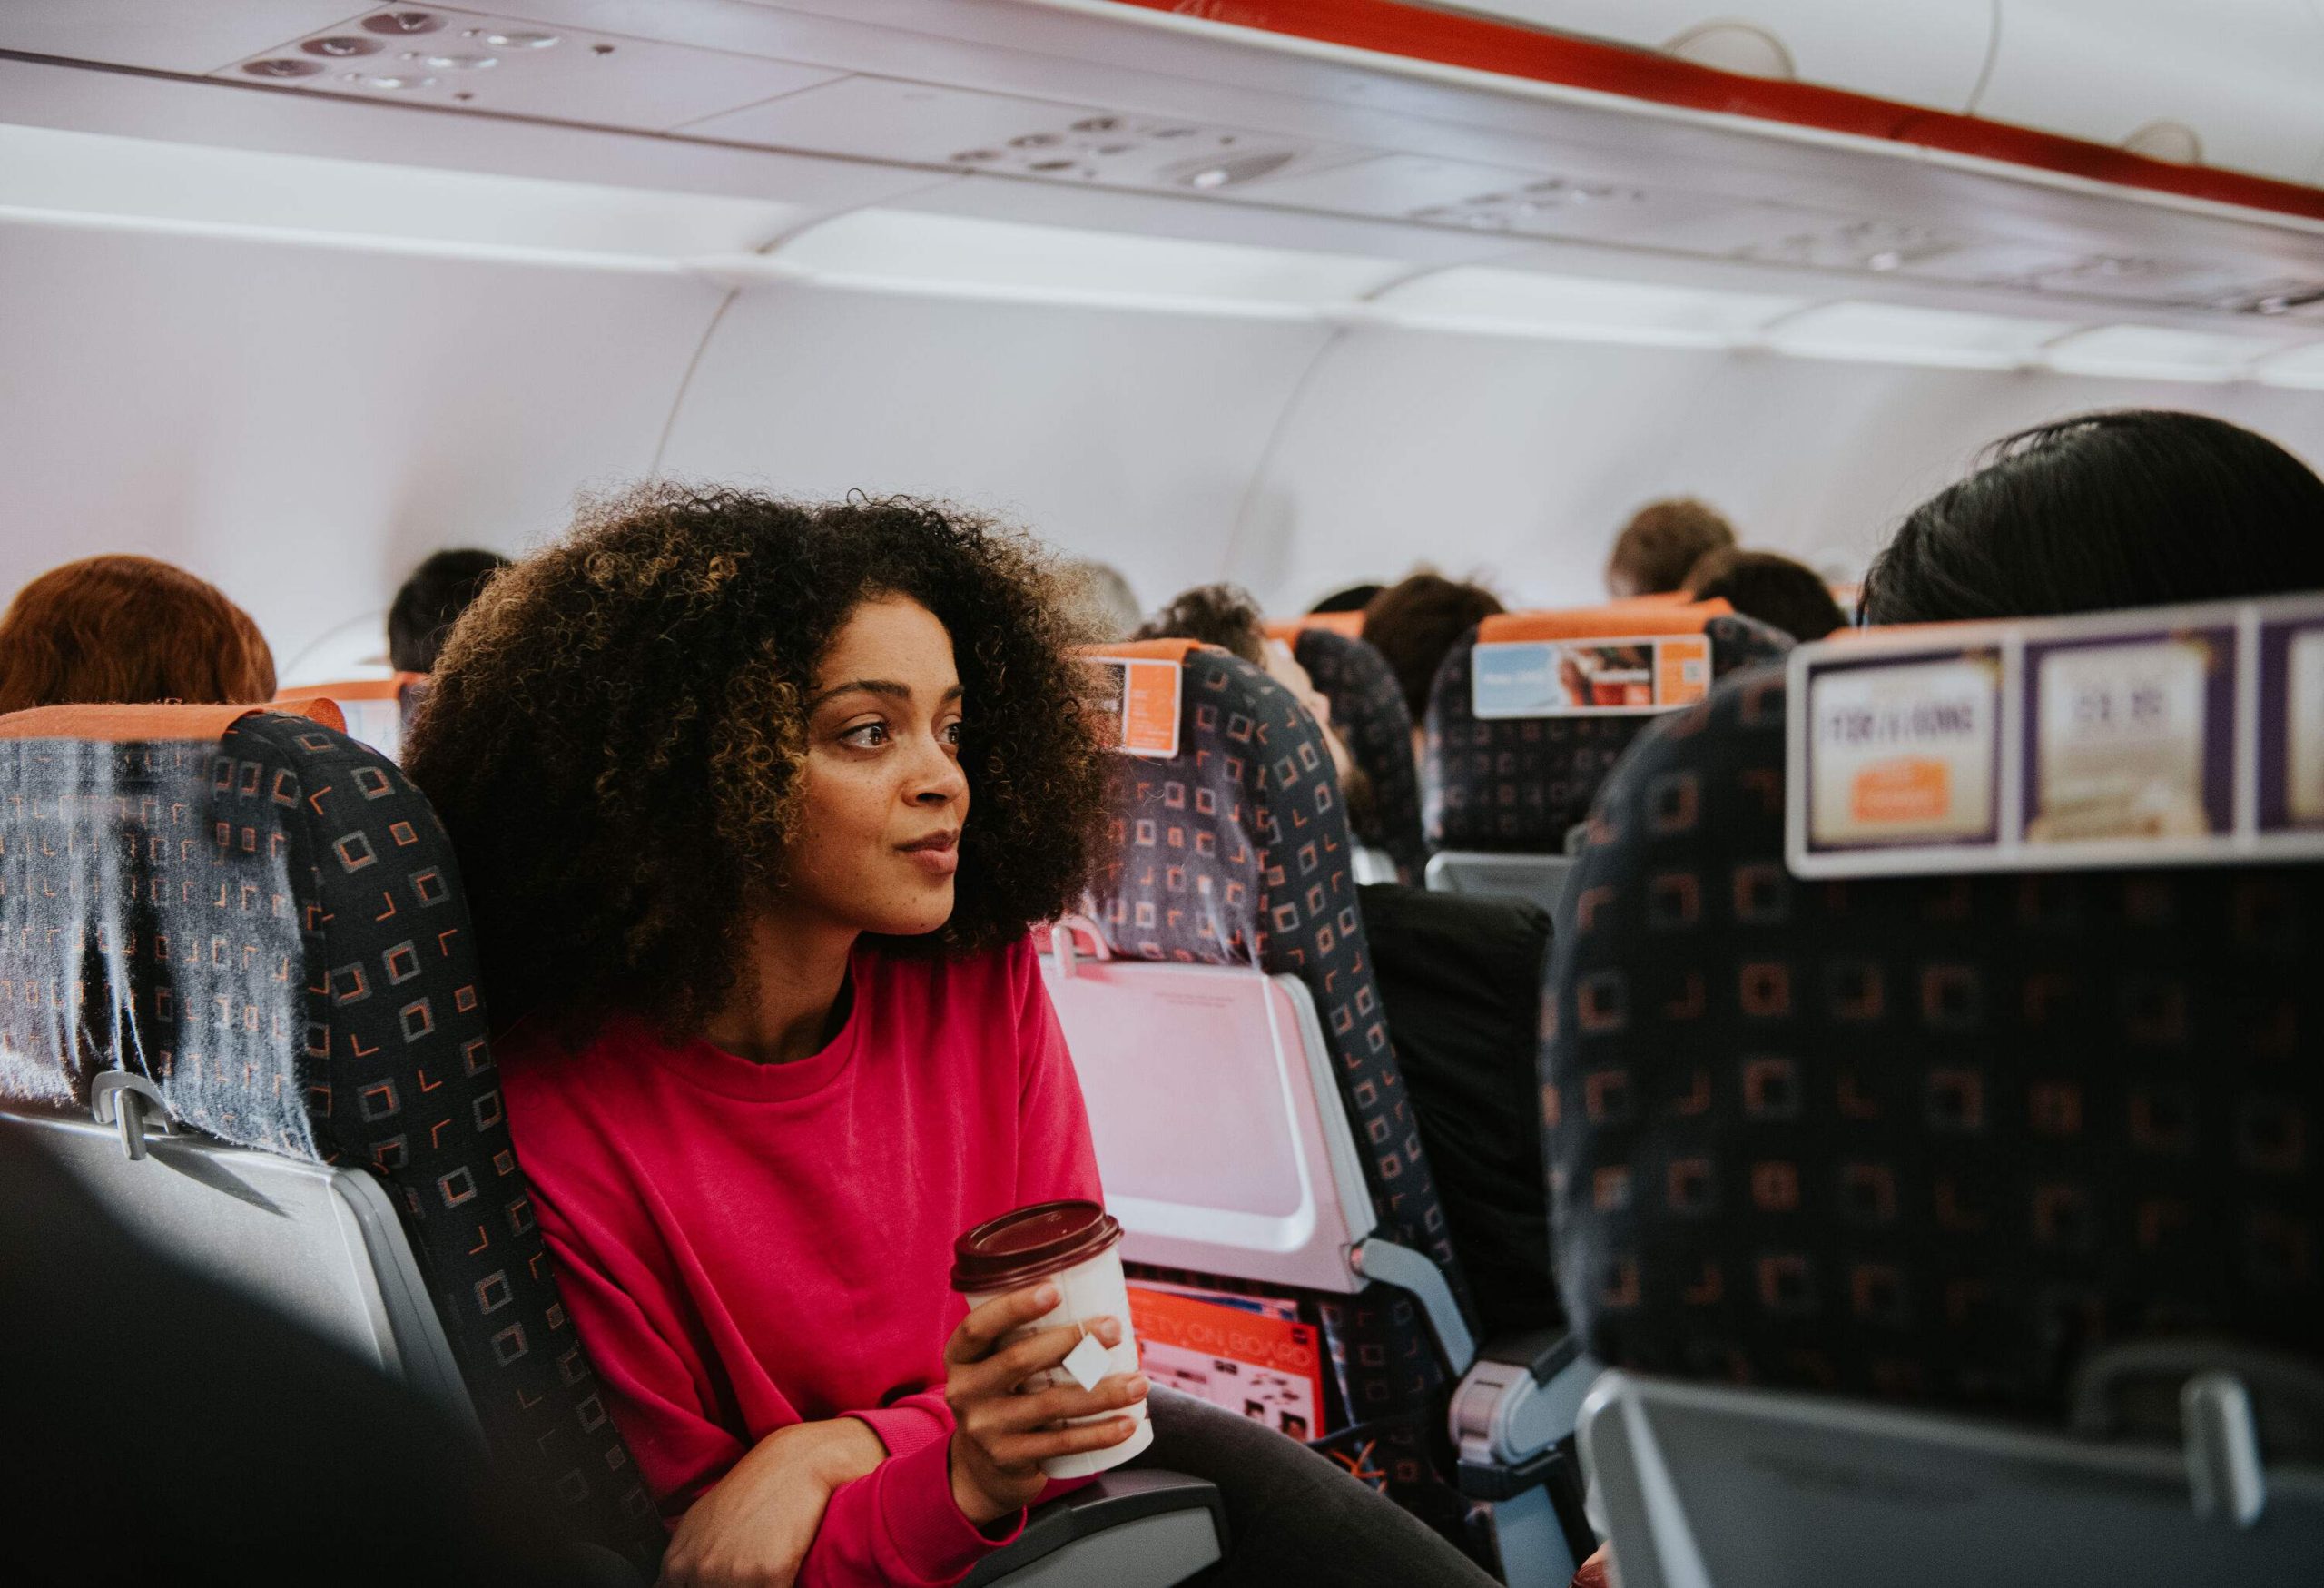 A young woman sits on a crowded plane on an aisle seat. She clutches a cup of coffee and looks perplexed and thoughtful.